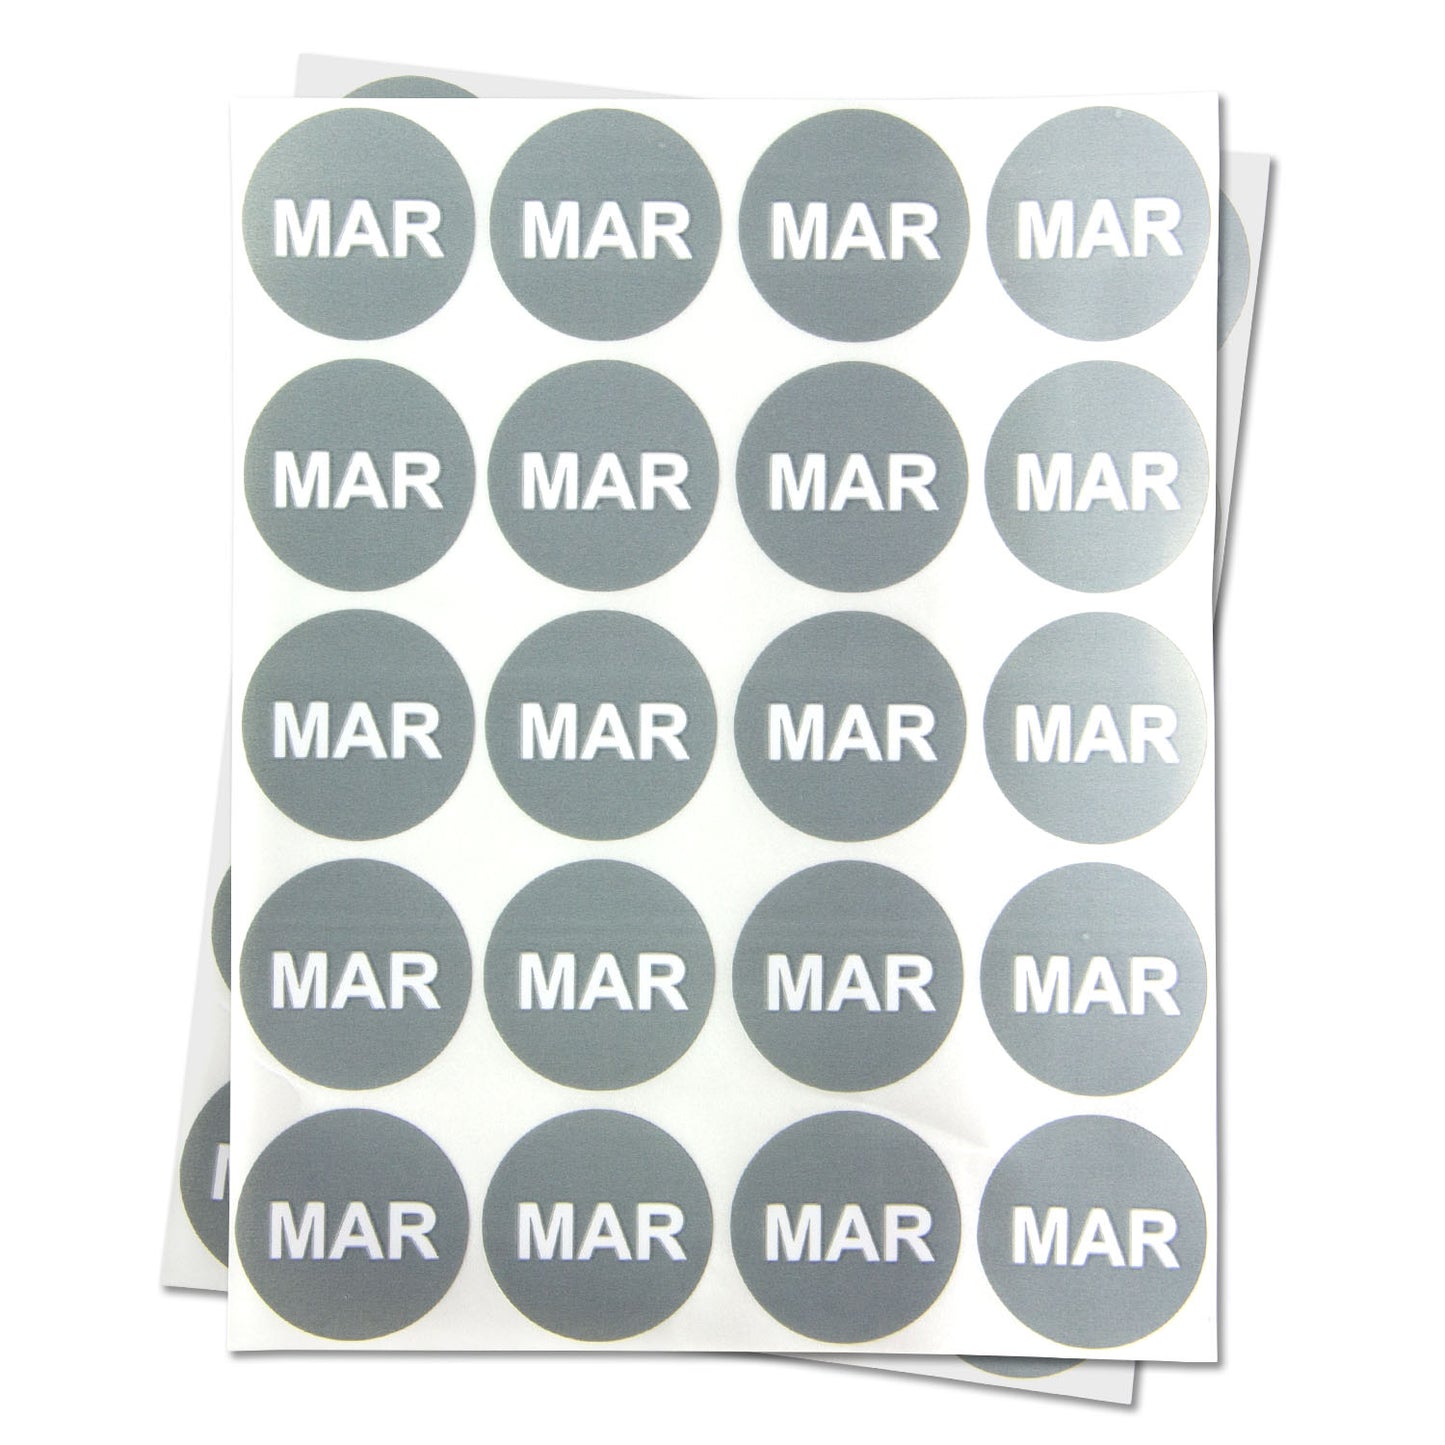 1 inch | Months of the Years: March Stickers